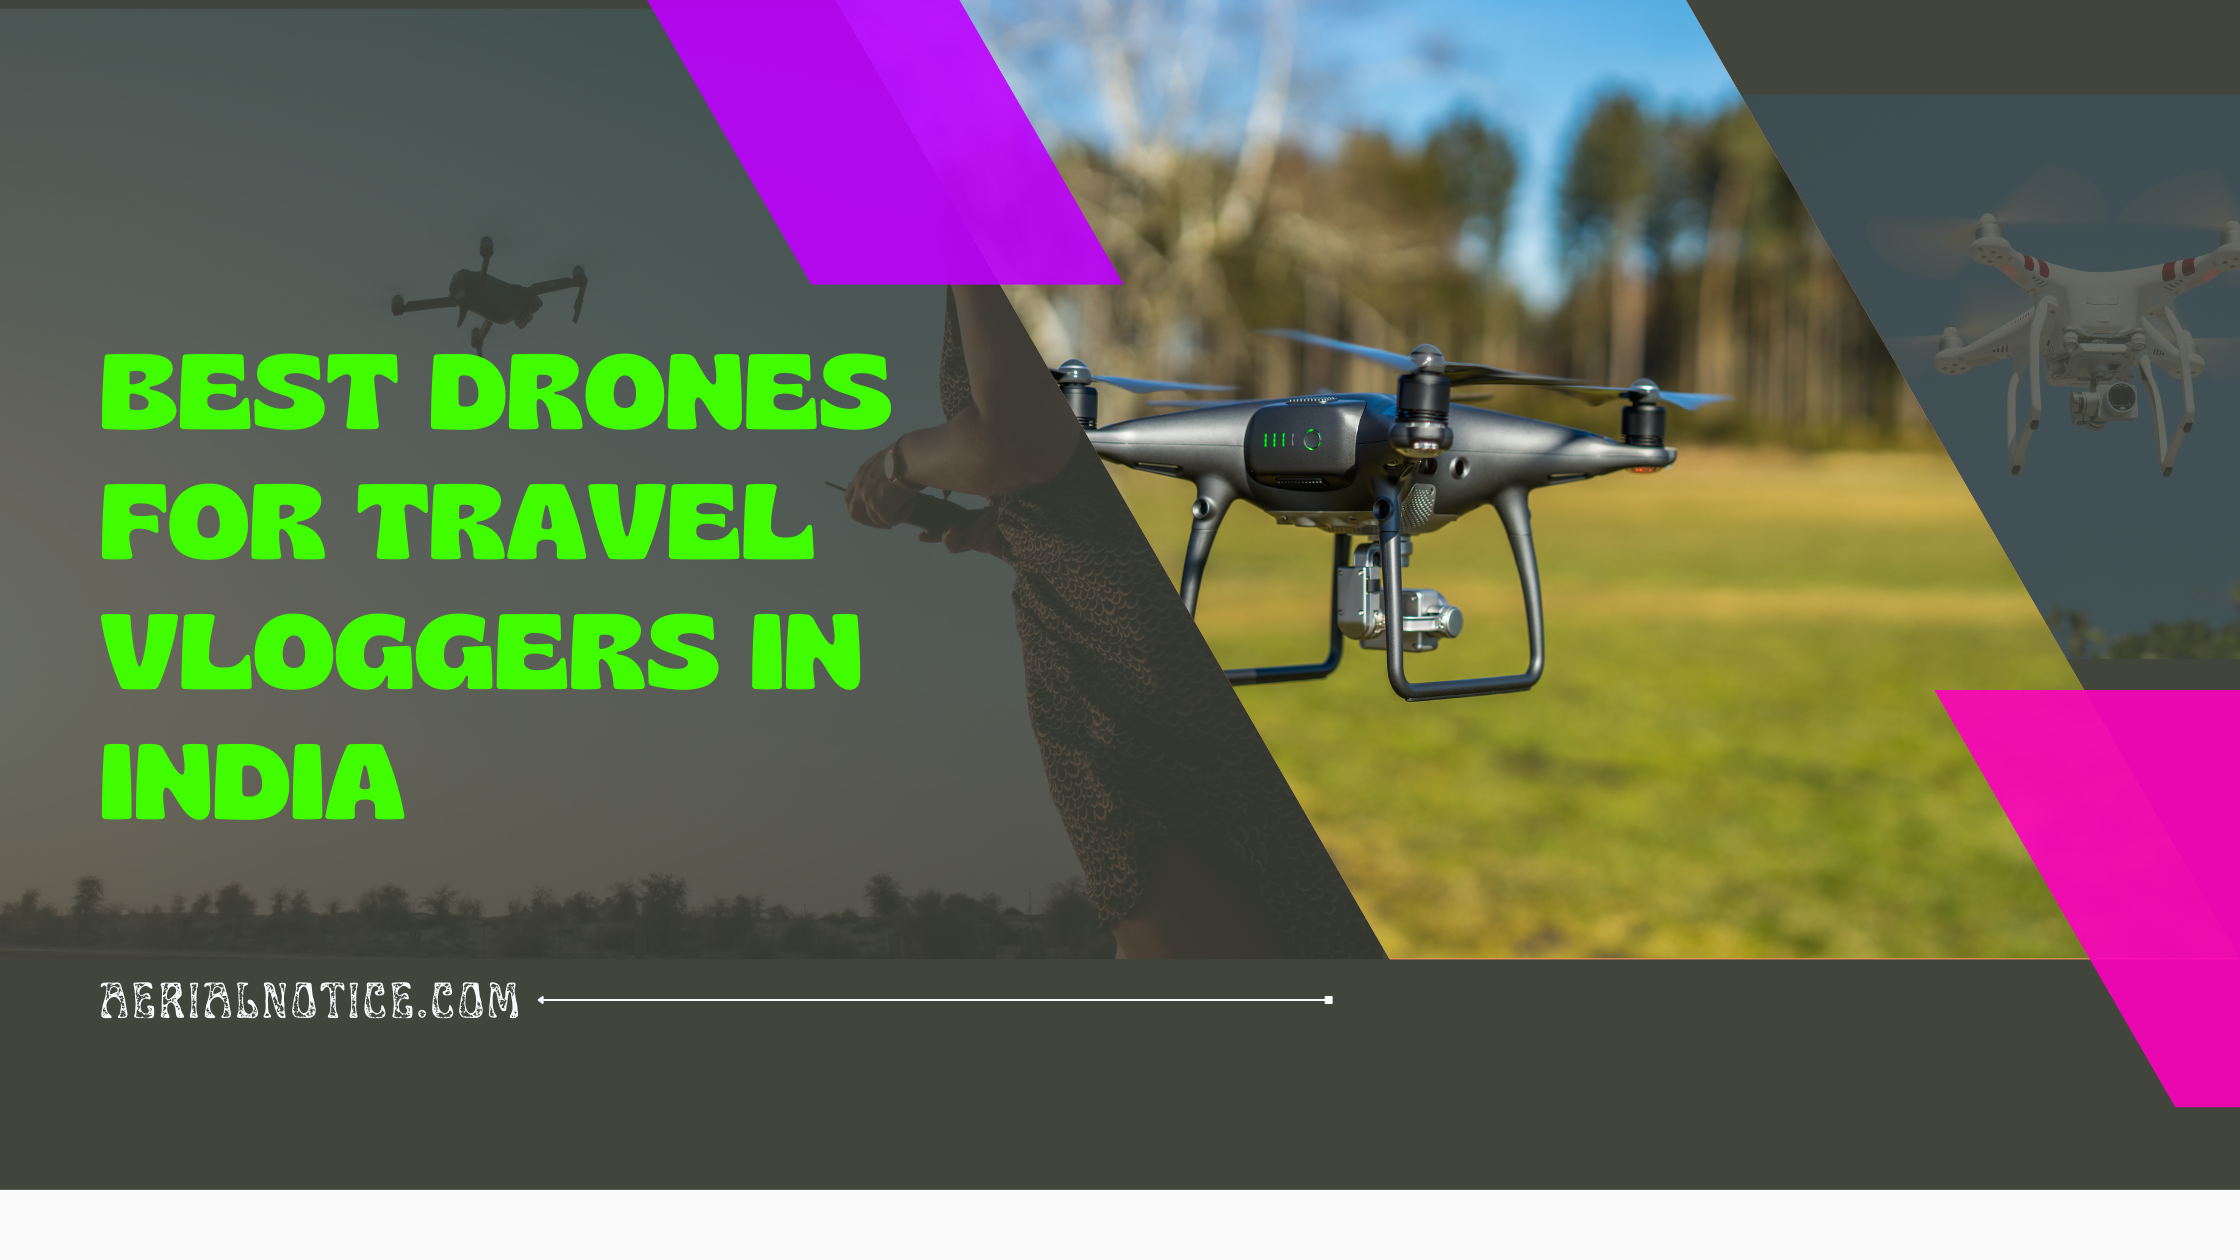 Drones for Travel Vloggers in India